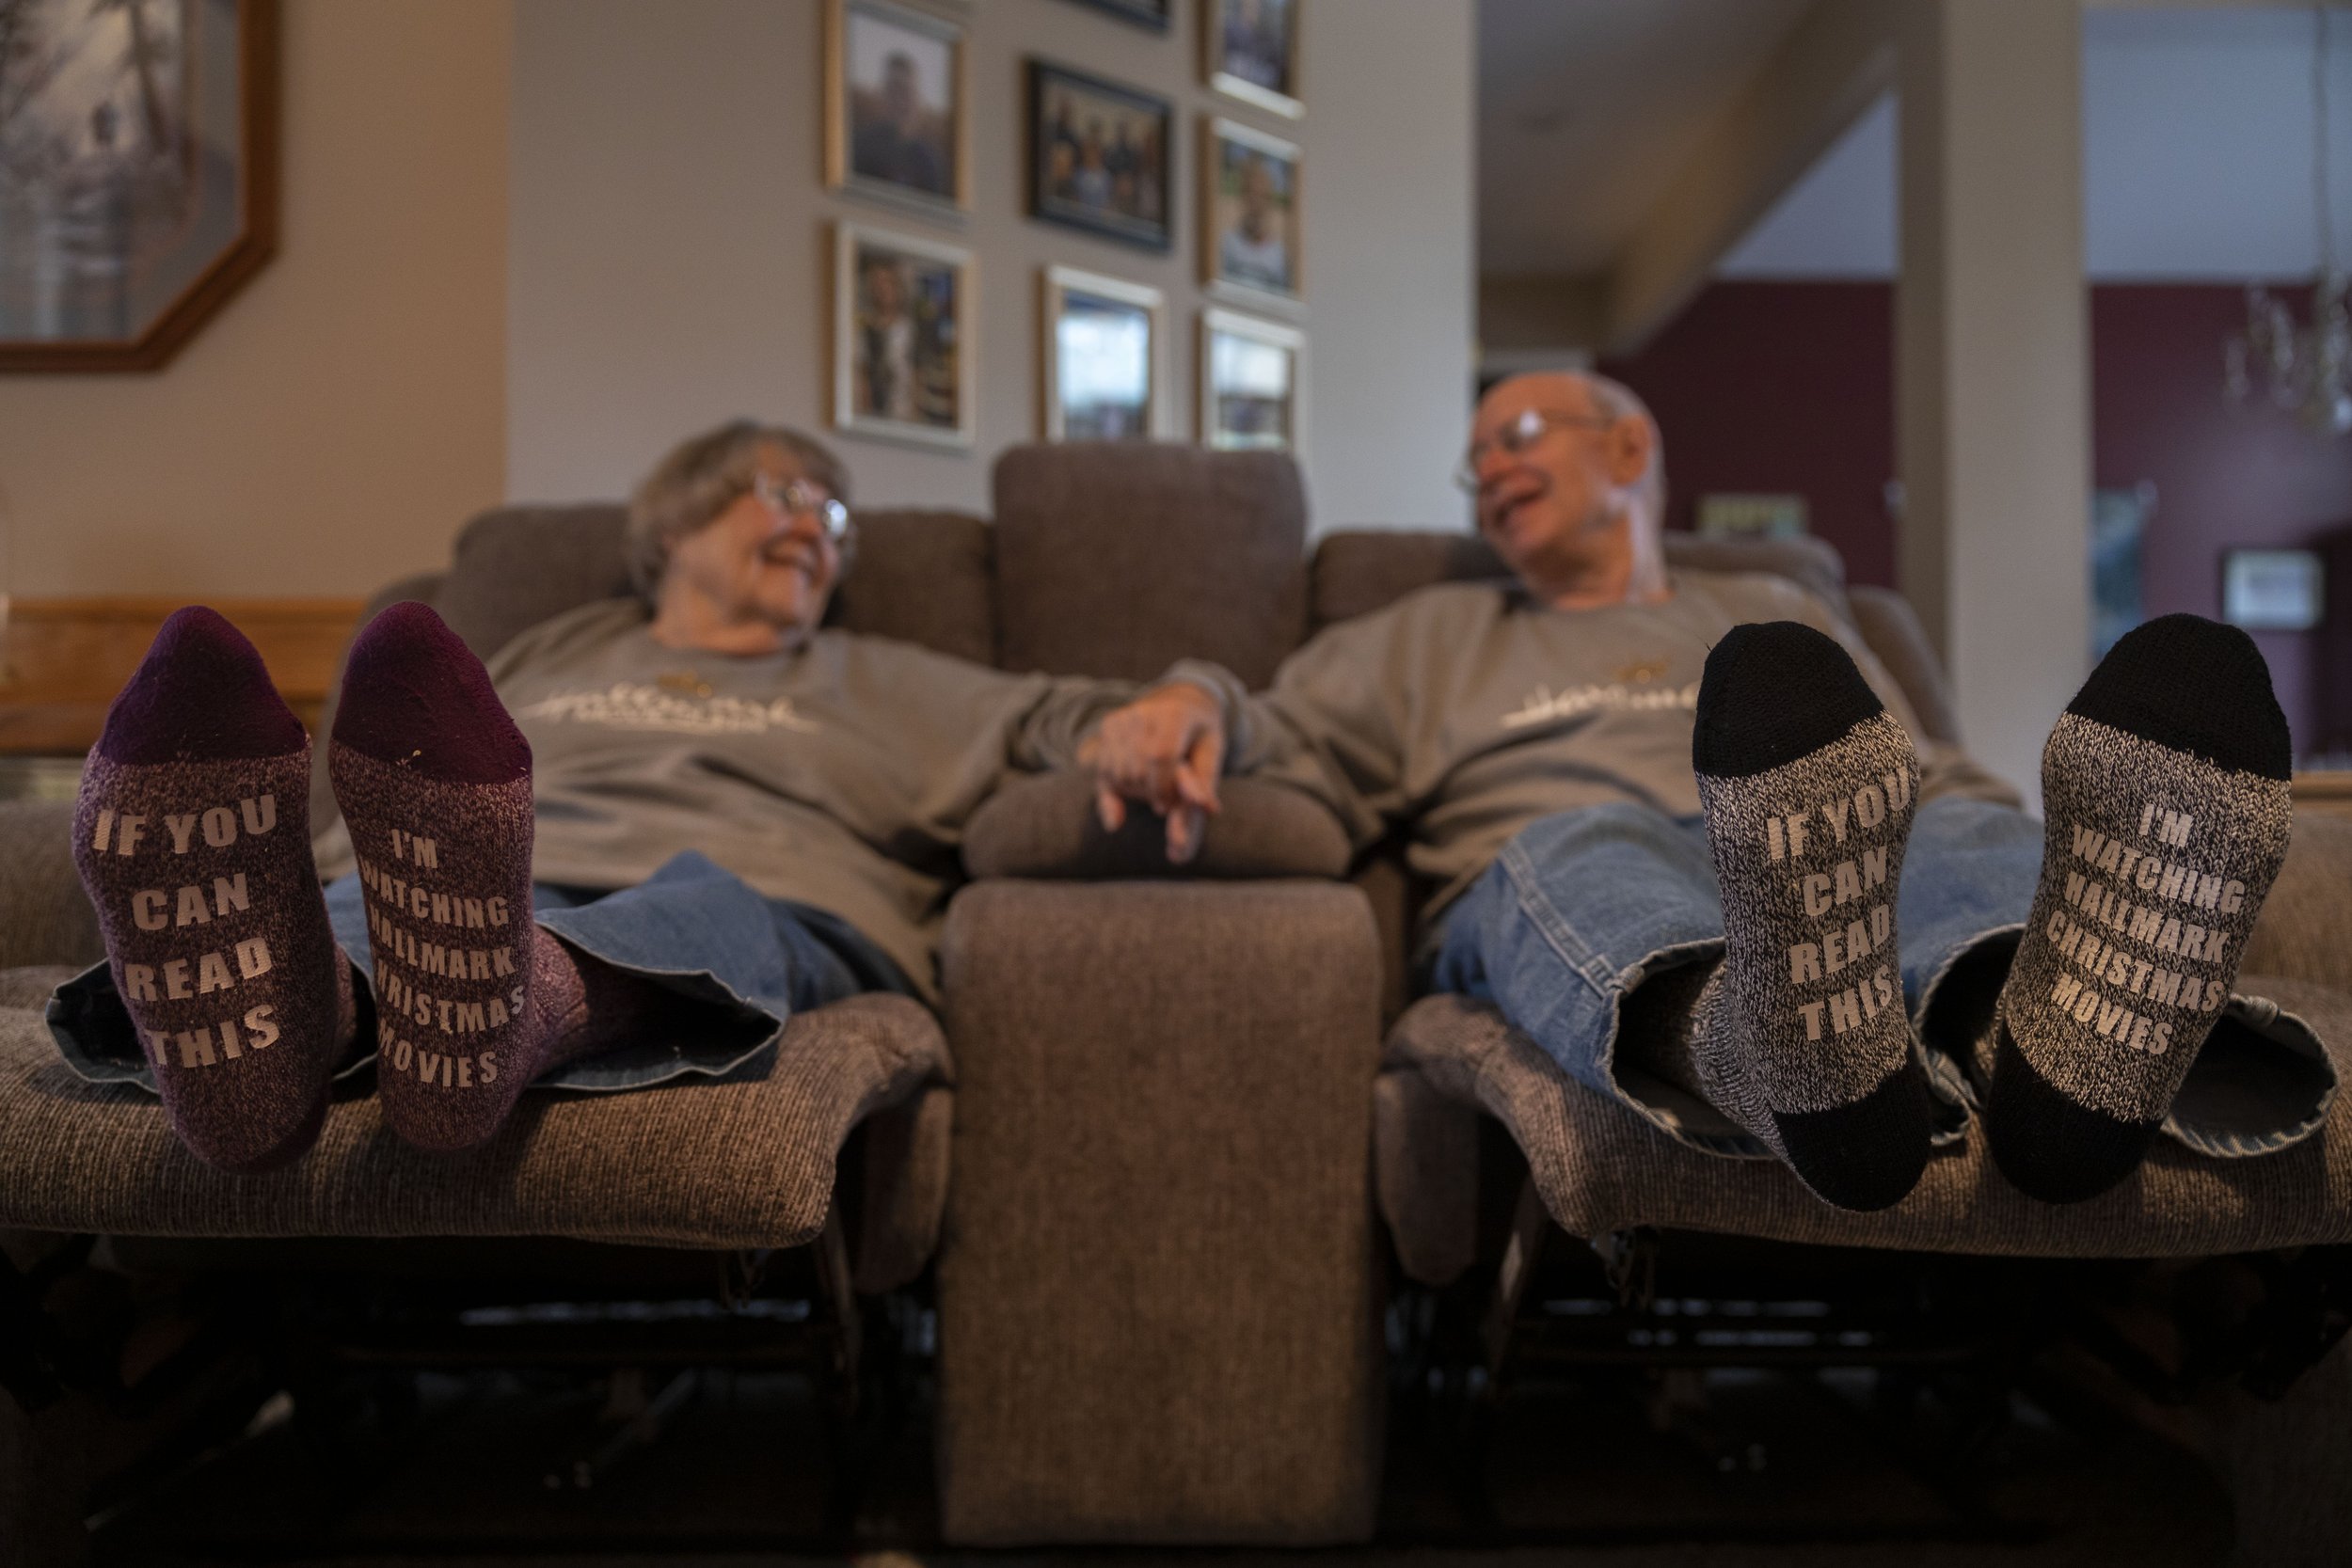  Cheryl and Joe Maggio show off their newly gifted socks while watching a Hallmark Christmas movie at their home on Wednesday, Oct. 27, 2021, in Olathe, Kan. The couple are huge fans of Hallmark Christmas movies and keep a catalog of the movies they 